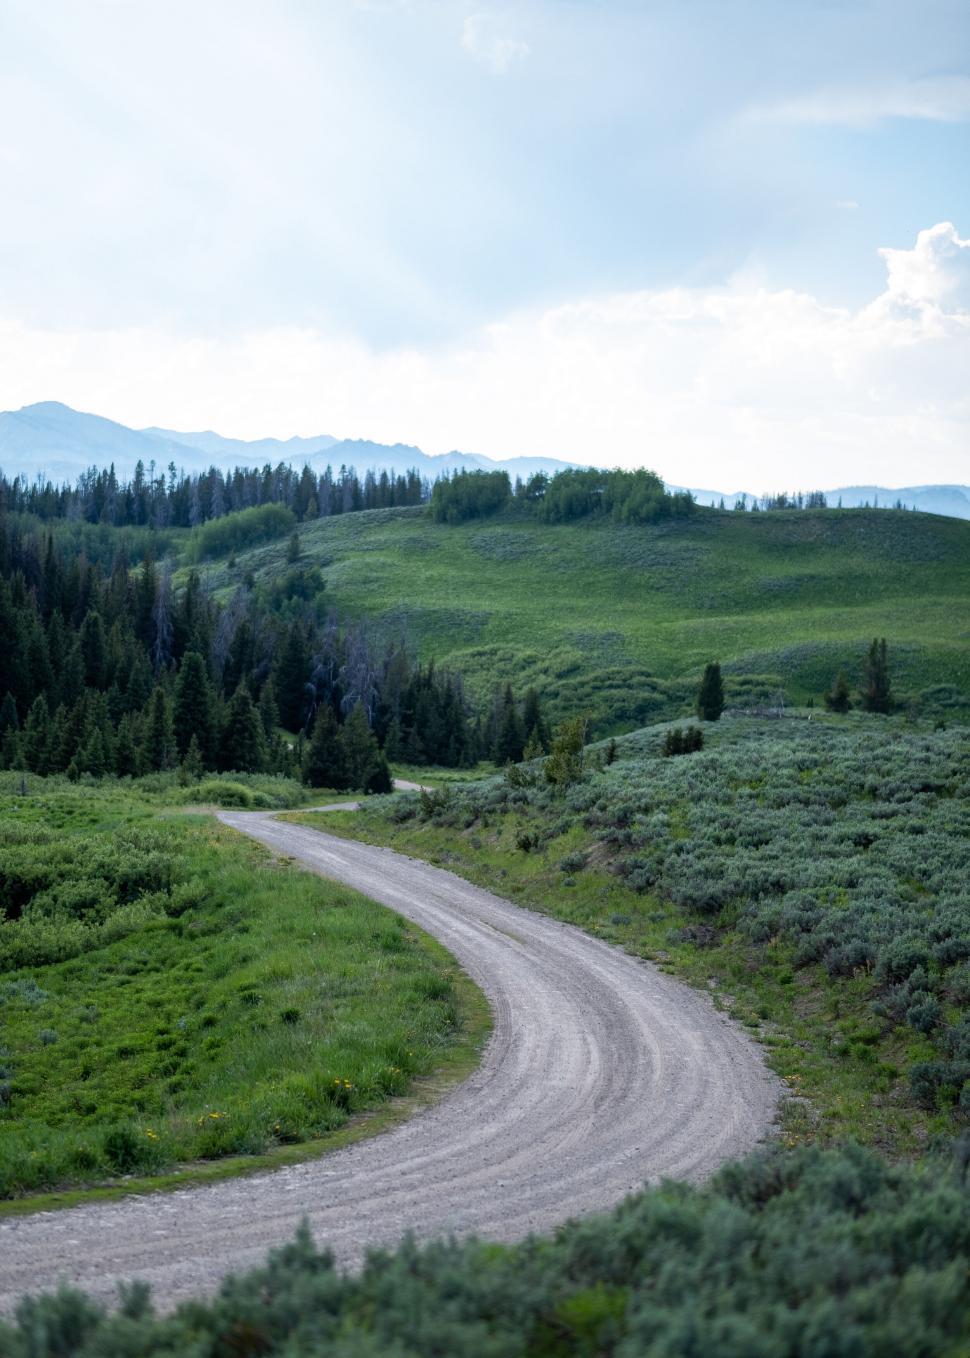 Free Image of Curving dirt road in a mountainous landscape 